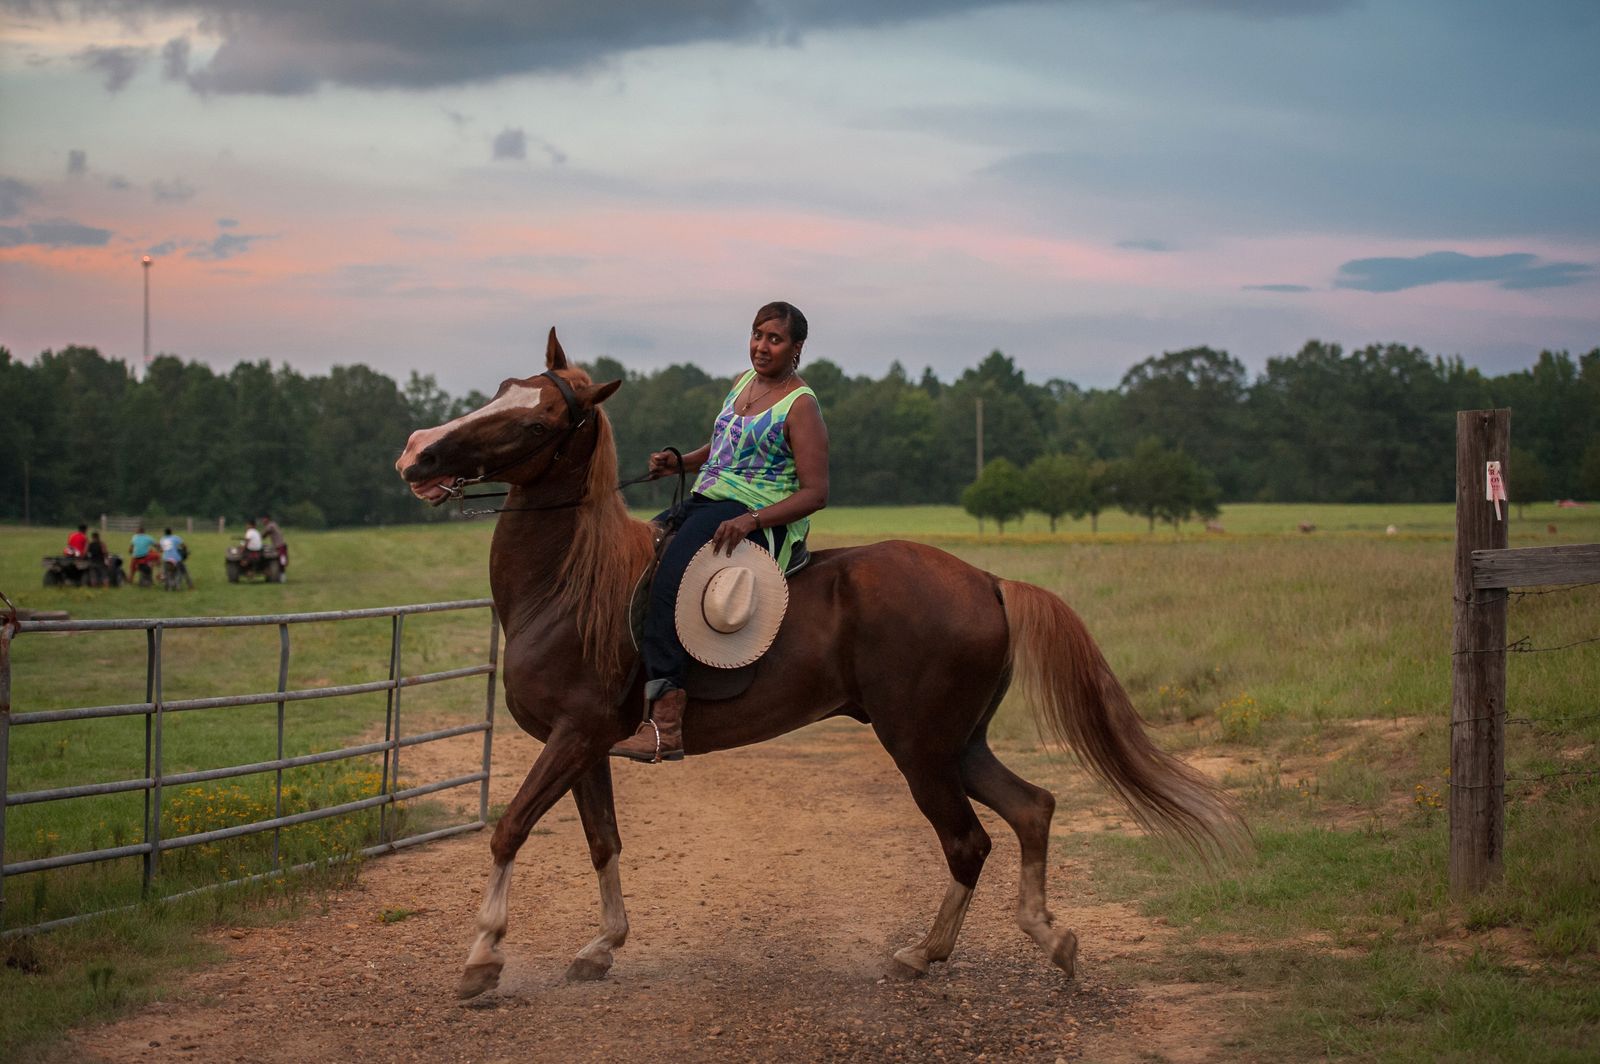 © Rory Doyle - Peggy Smith poses for a portrait on her horse at a trail ride in Tallahatchie County, Mississippi on Aug. 20, 2017.